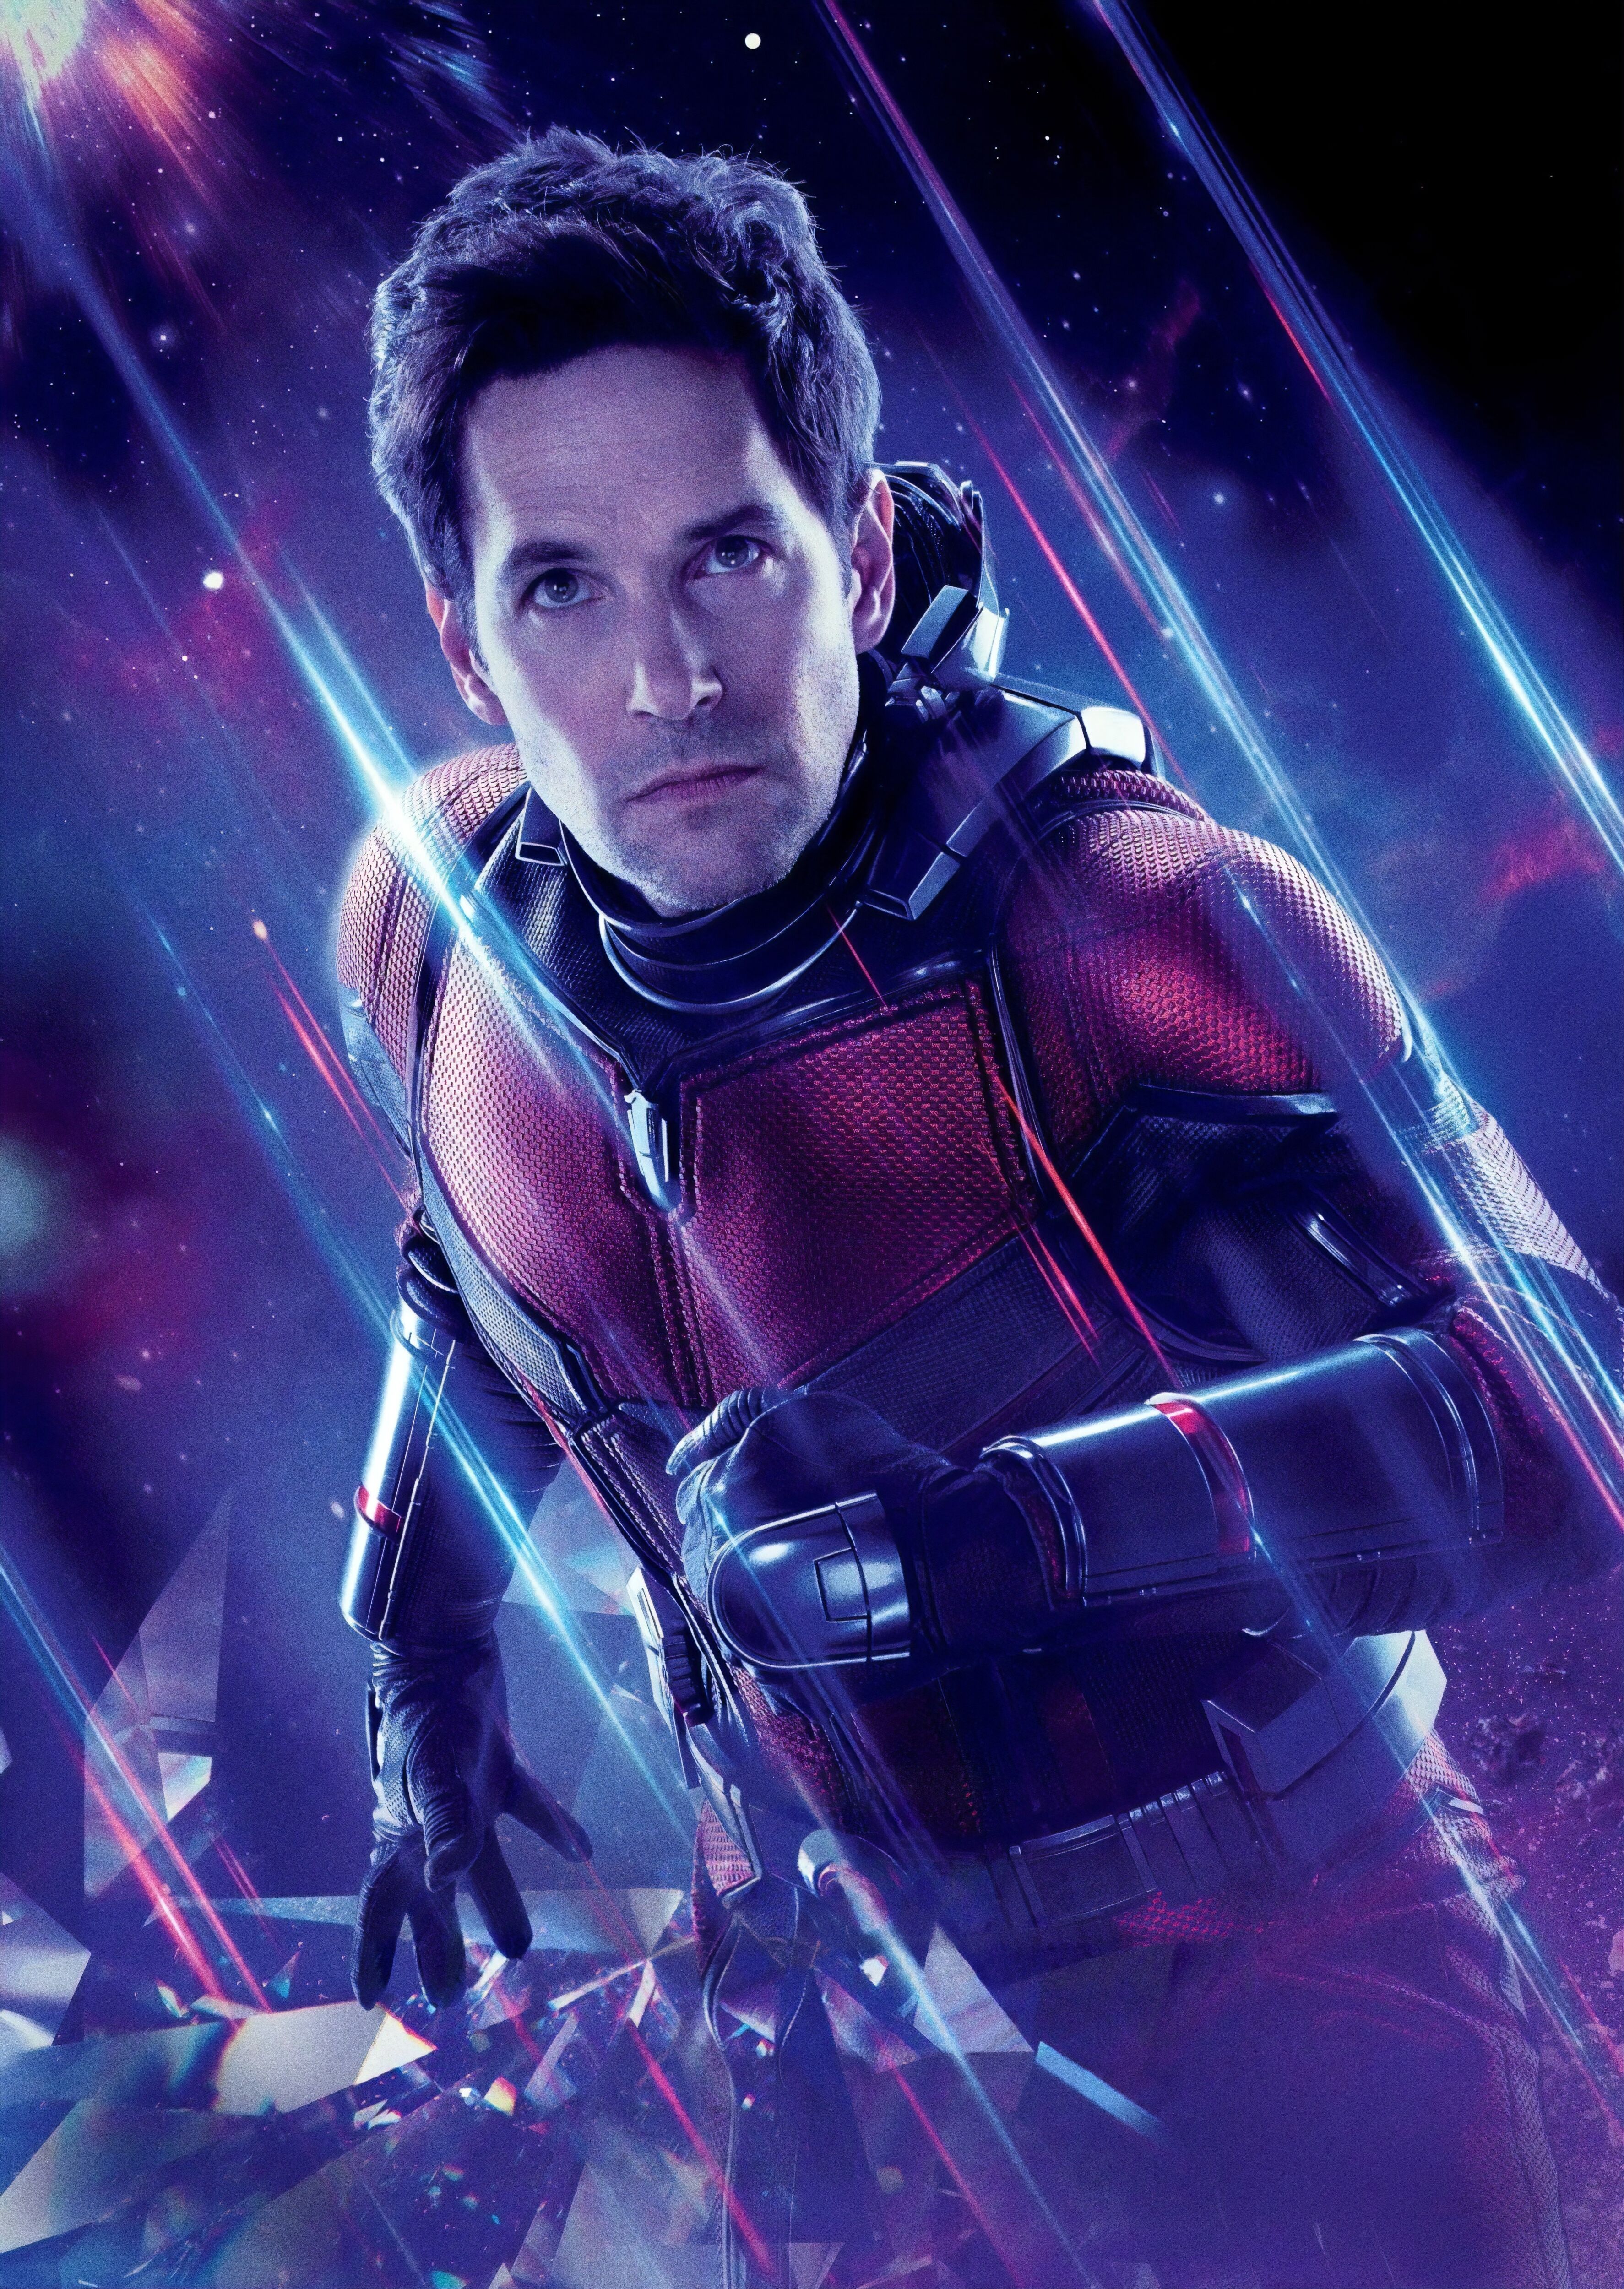 Ant-Man Poster Is Your Standard Marvel Poster